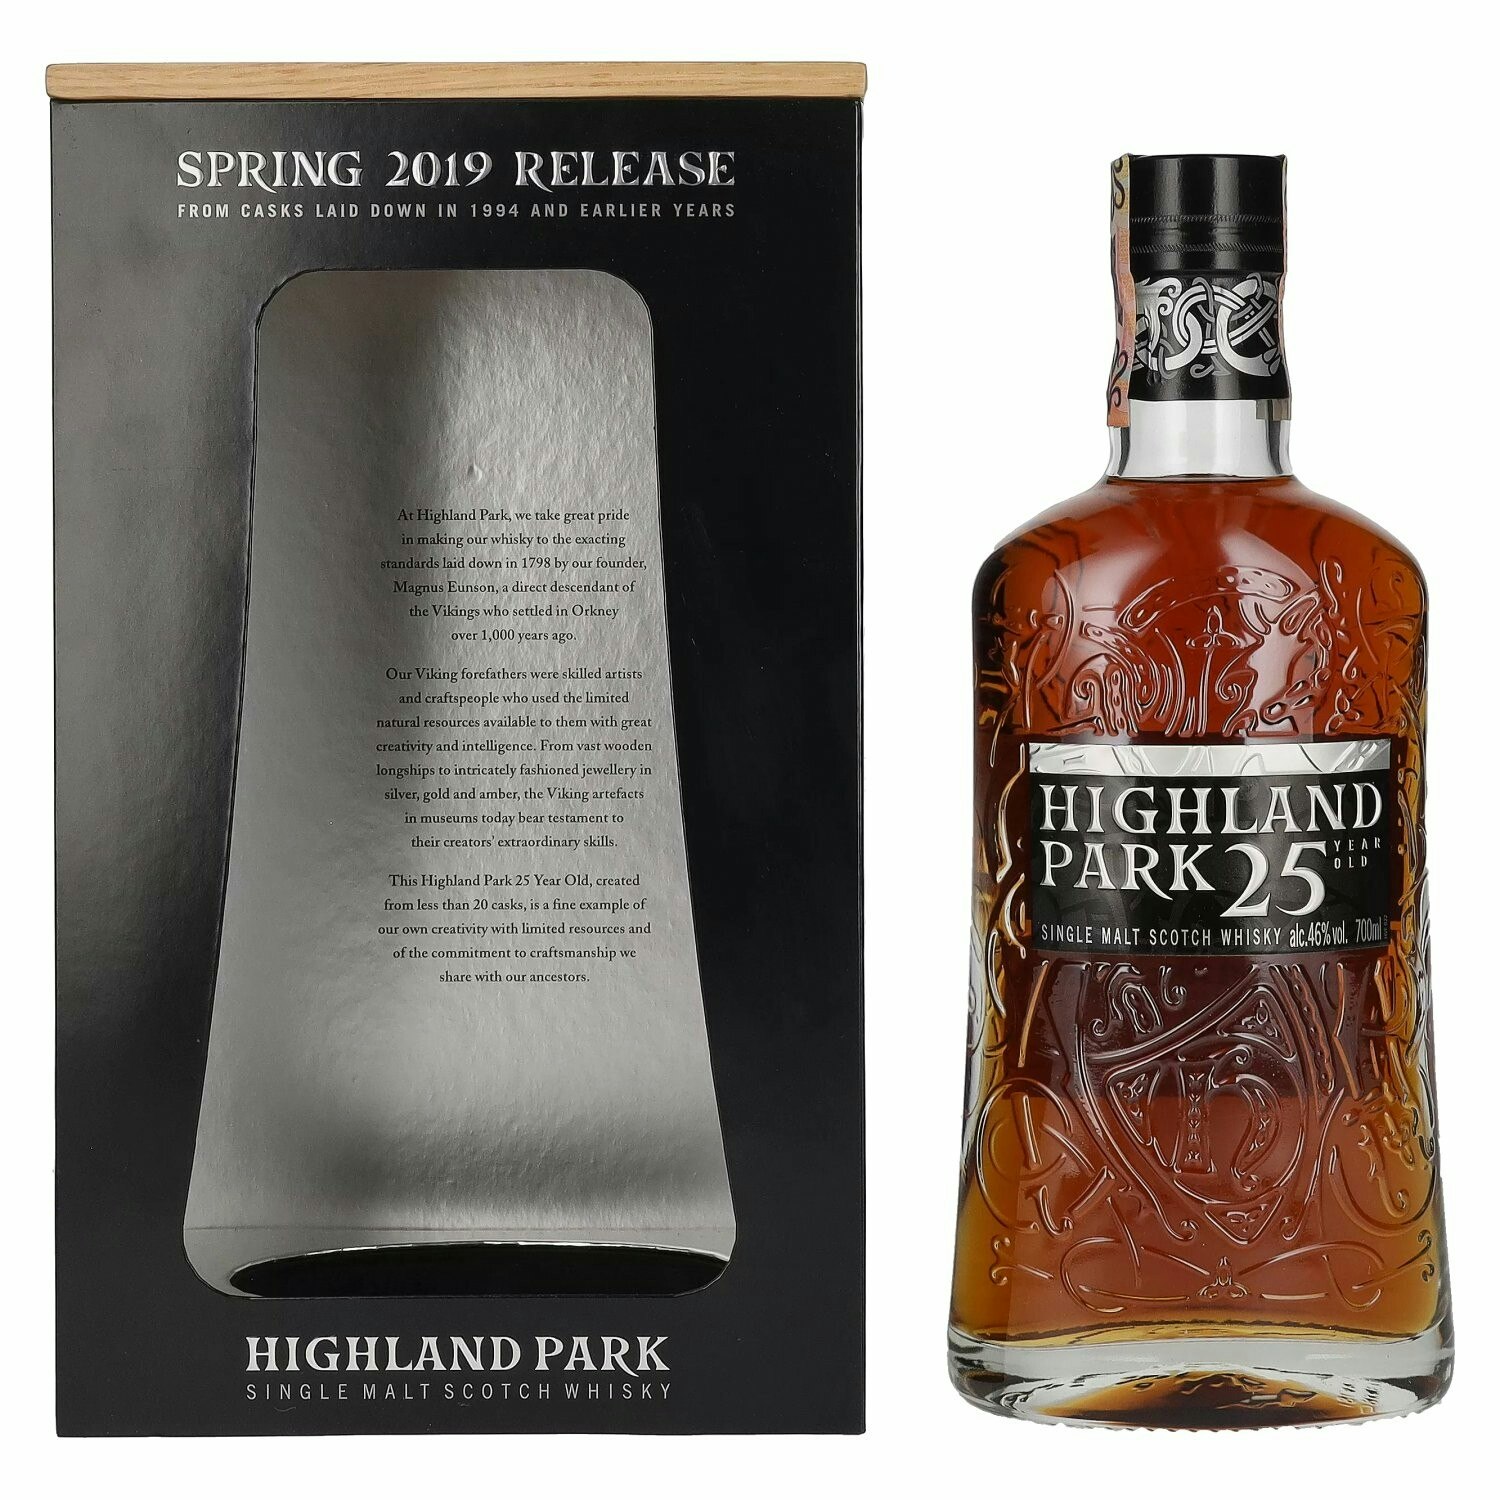 Highland Park 25 Years Old SPRING RELEASE 2019 46% Vol. 0,7l in Giftbox